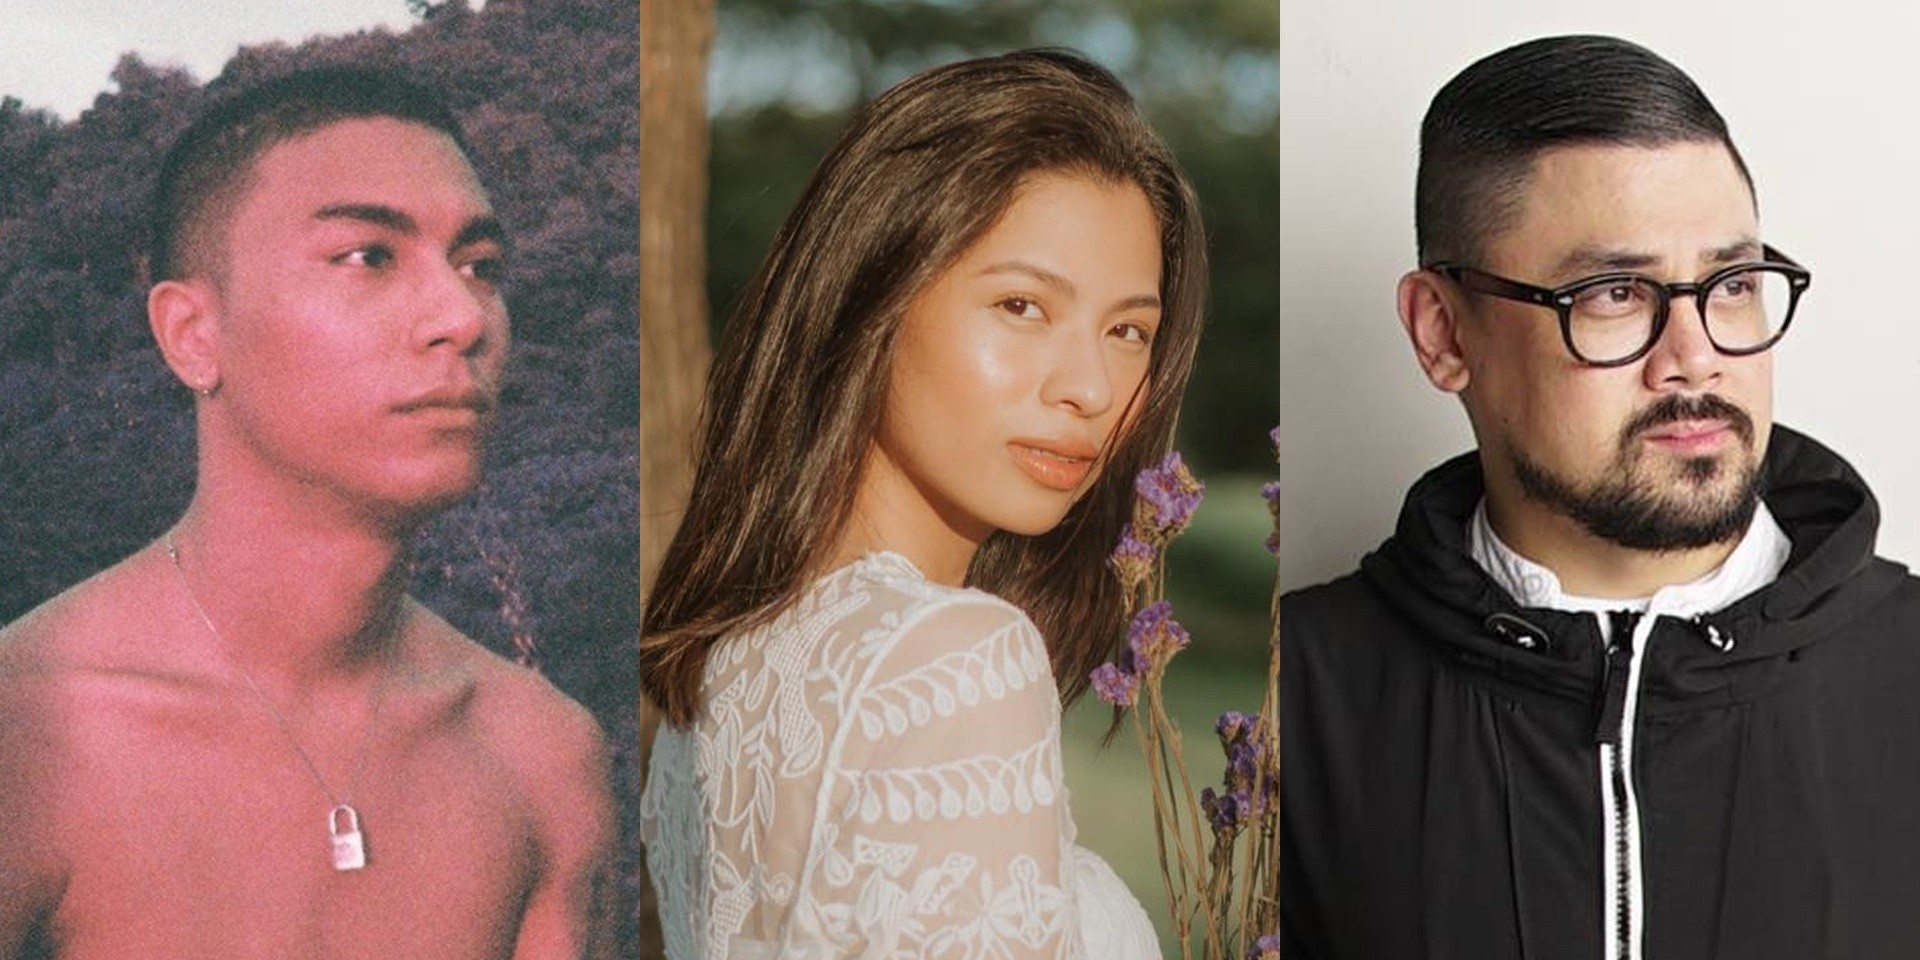 Jason Dhakal, Janine Teñoso, Conscious & the Goodness, and more release new music – listen